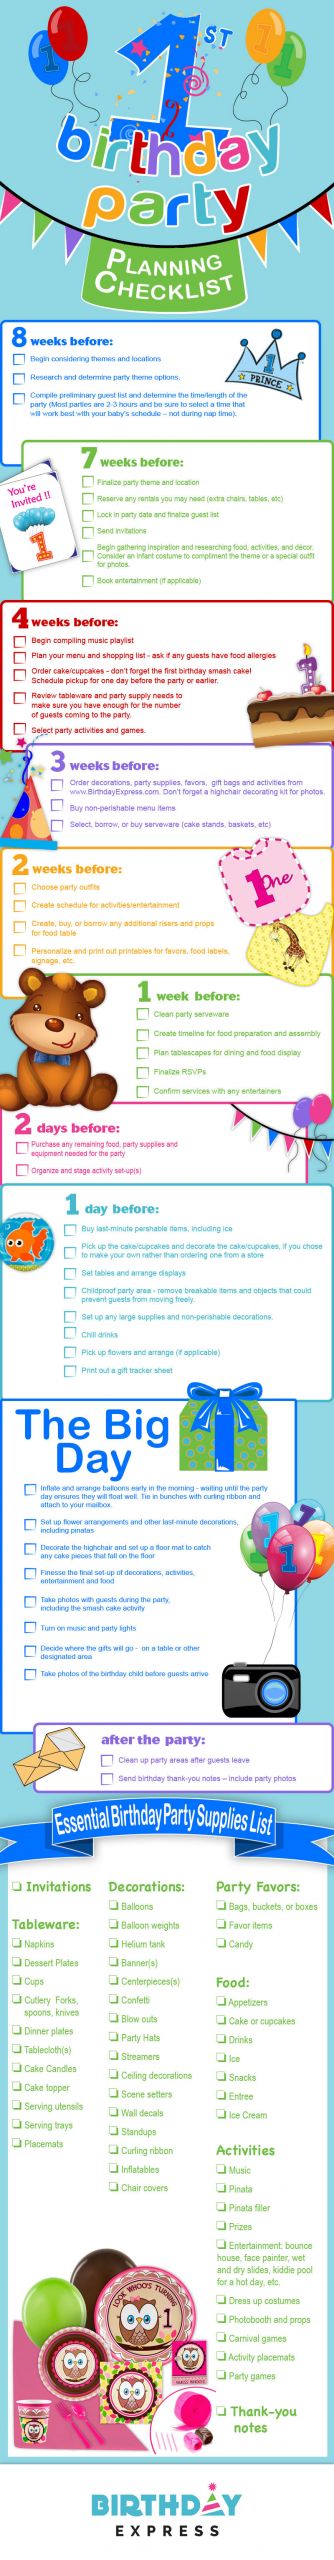 First Birthday Party Checklist
 Tips to Plan Baby s First Birthday Party Tipsographic